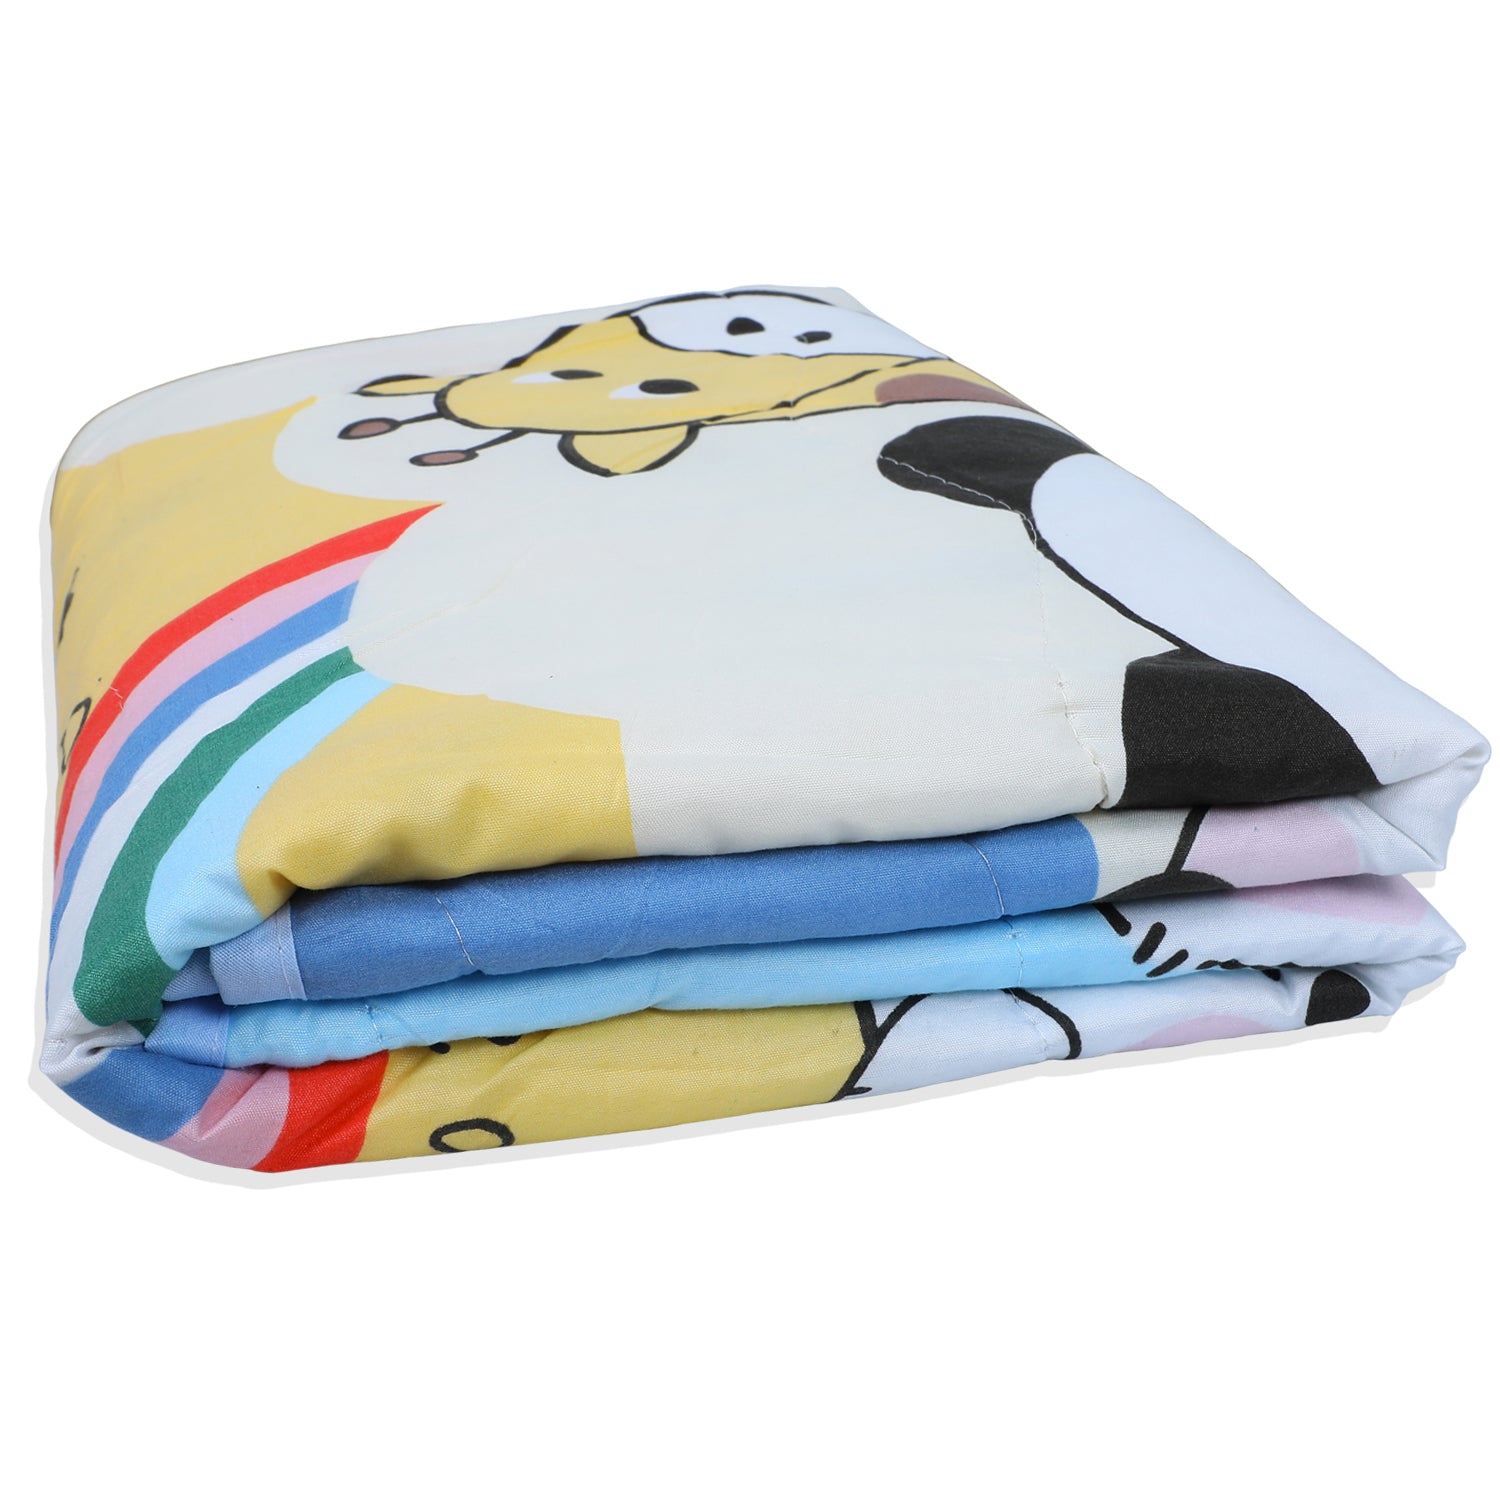 Baby Moo Rainbows And Animals Soft Quilted Premium Reversible Blanket - Multicolour - Baby Moo